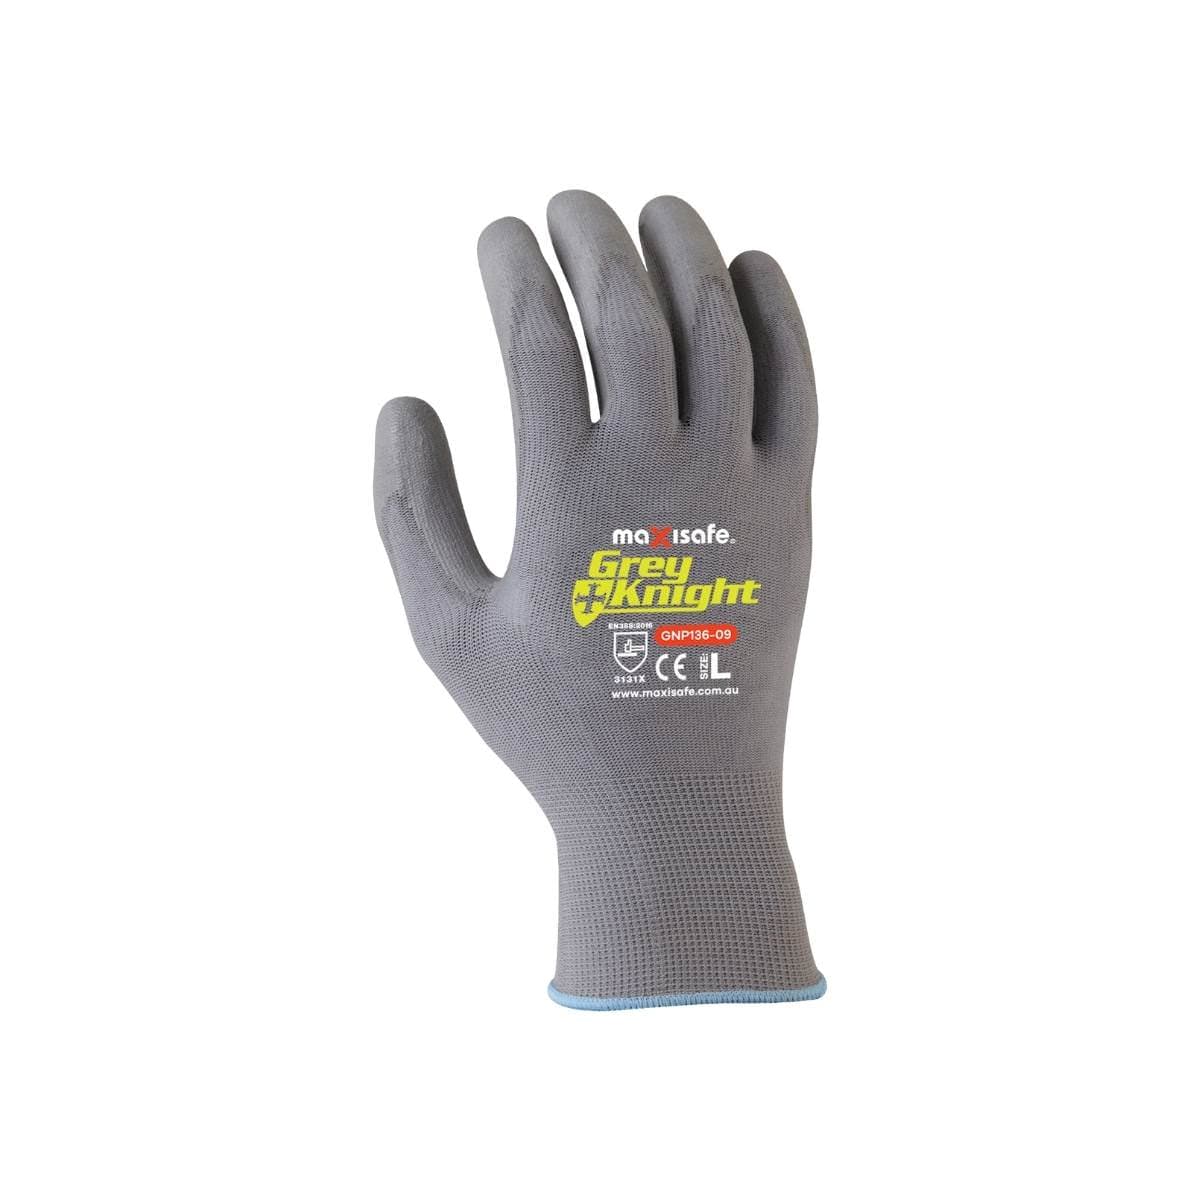 Maxisafe 'Grey Knight' PU Coated Glove (Pack of 12)